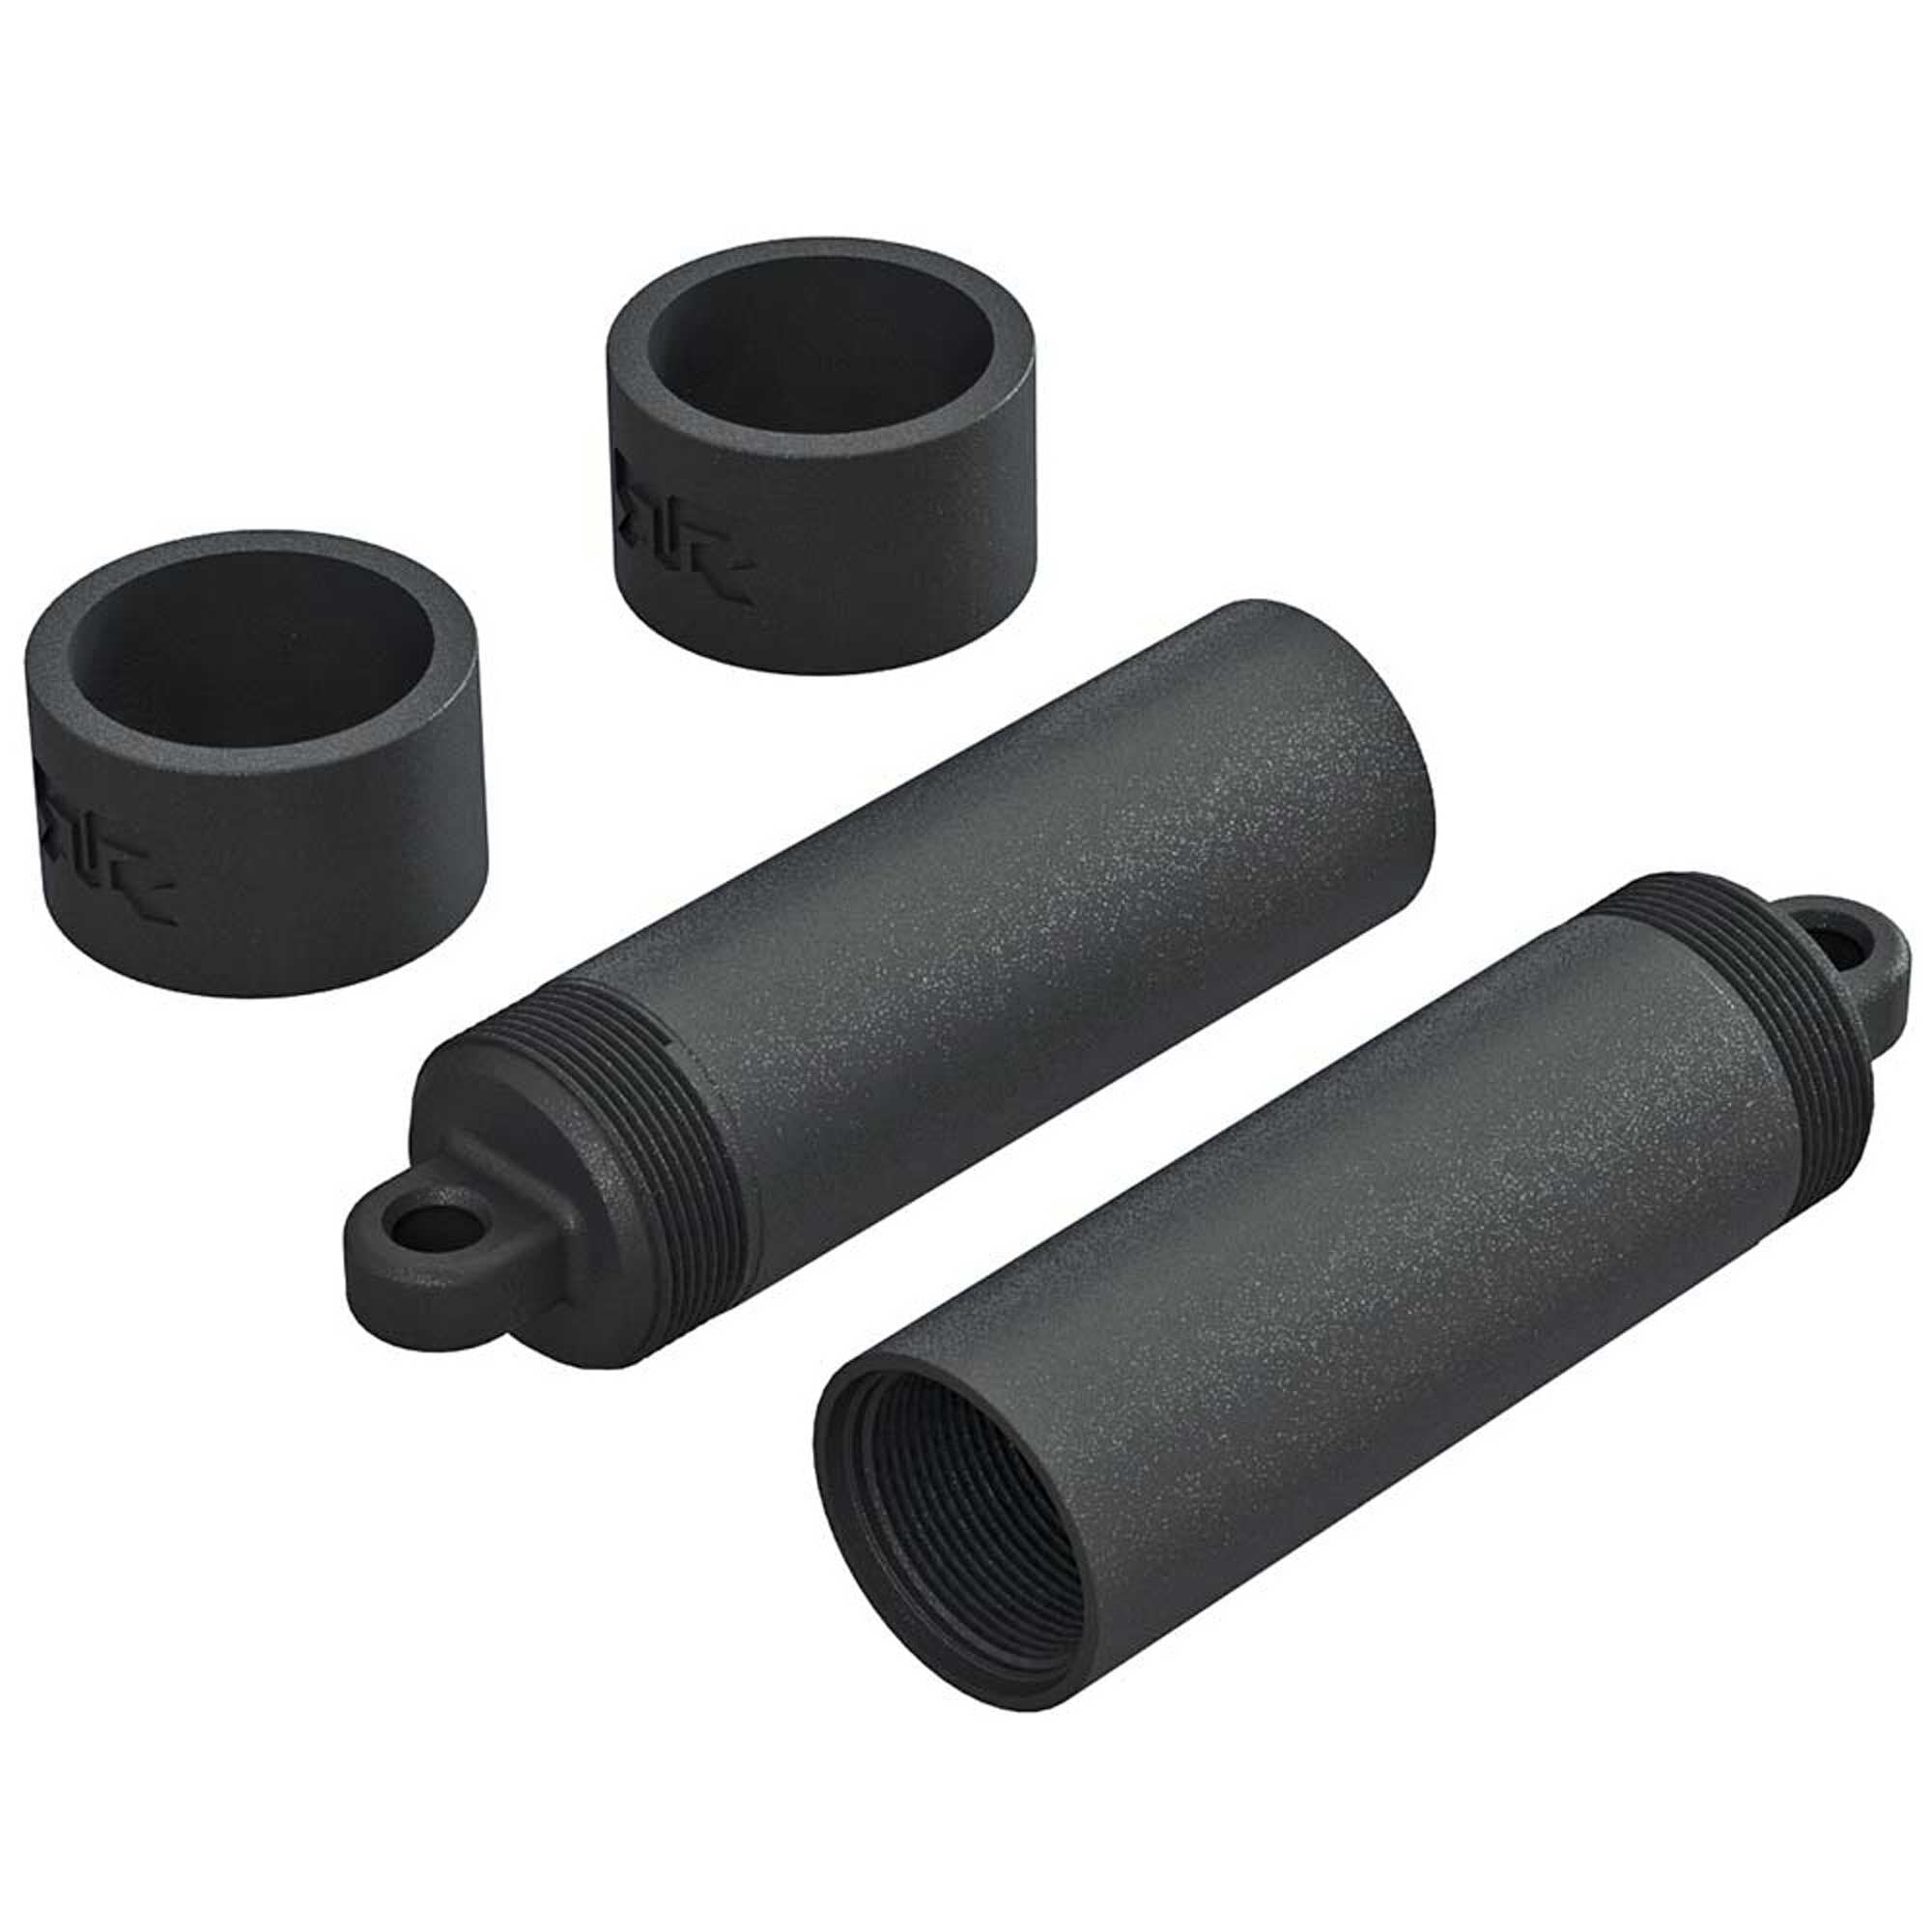 Arrma 4x4 Big Bore Shock Body & Spring Spacer Set 15x60mm (2) *Clearance